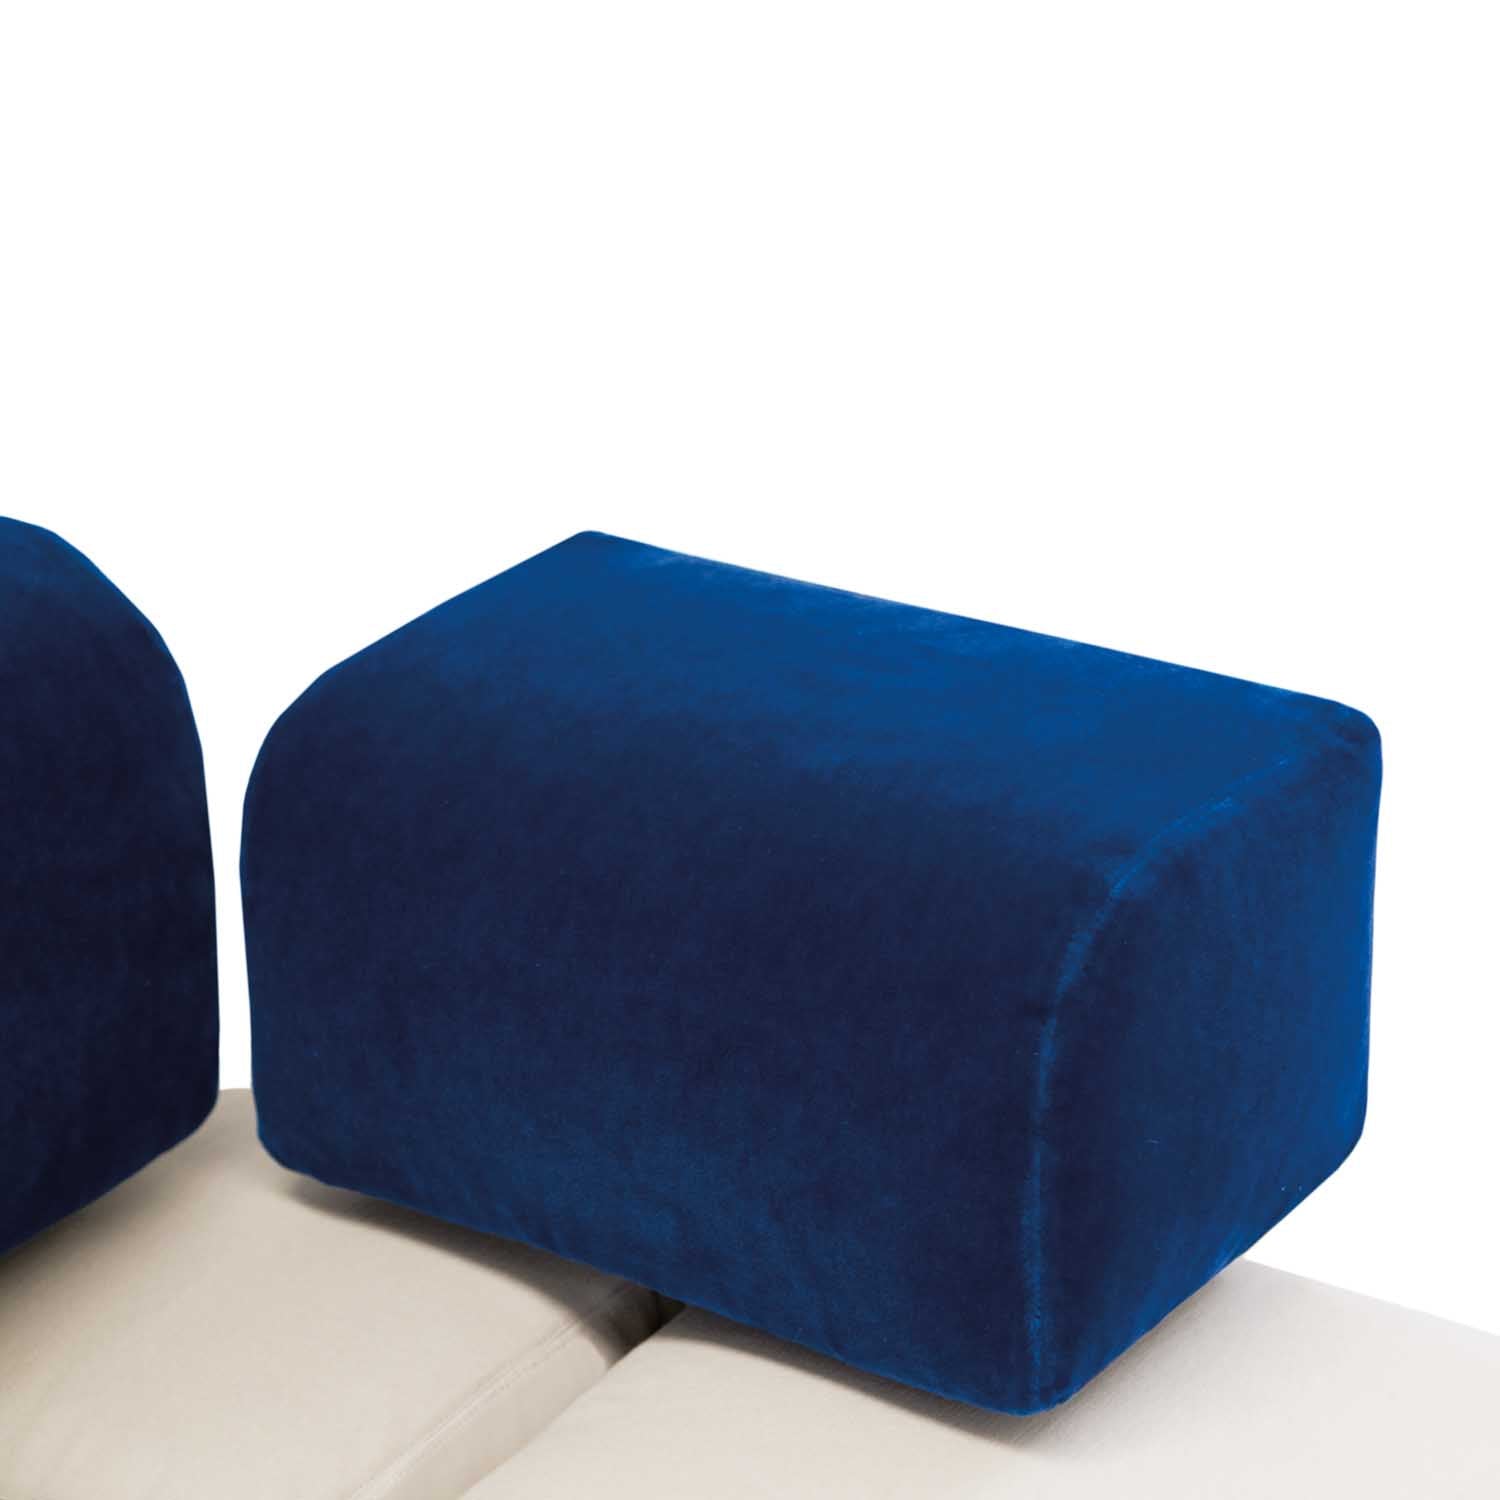 Square Shape armrest for Contemporary Appeal